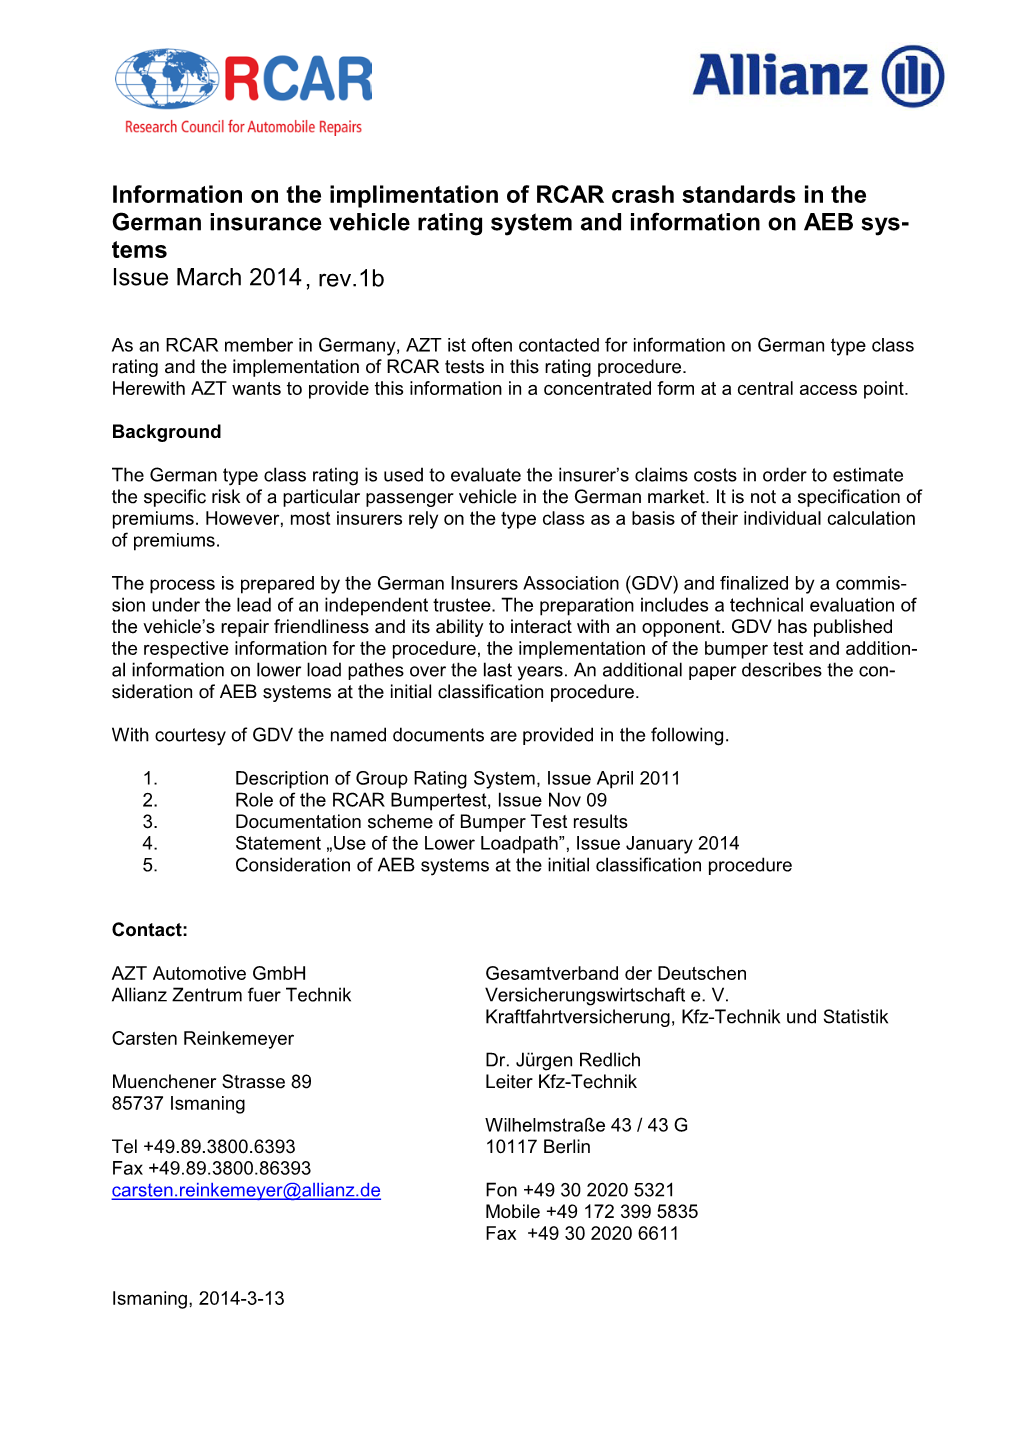 Information on the Implimentation of RCAR Crash Standards in the German Insurance Vehicle Rating System and Information on AEB Sys- Tems Issue March 2014 , Rev.1B